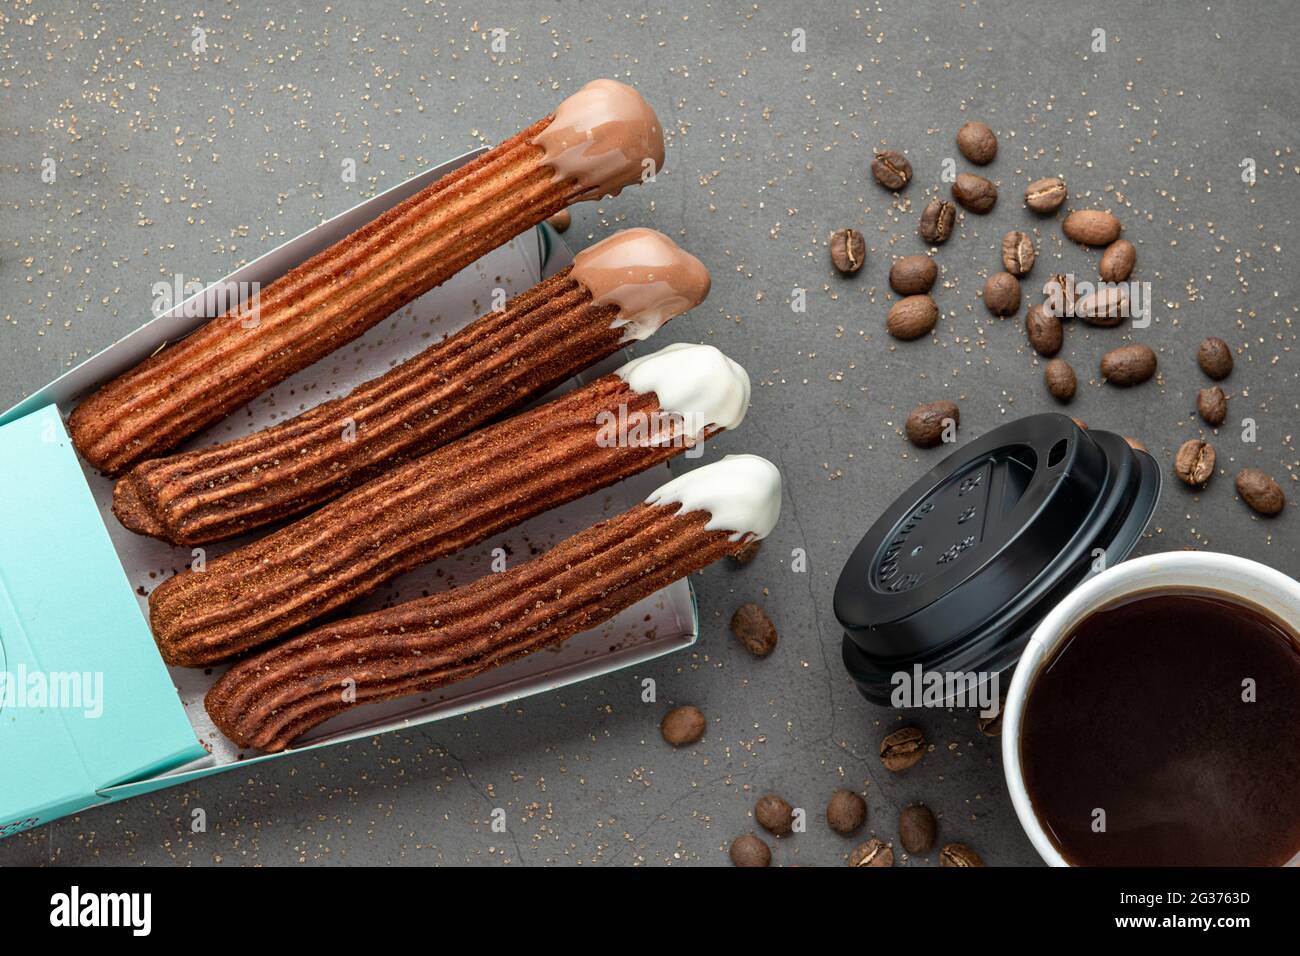 Top view of take away coffee next to chocolate filled and plain churros. Stock Photo